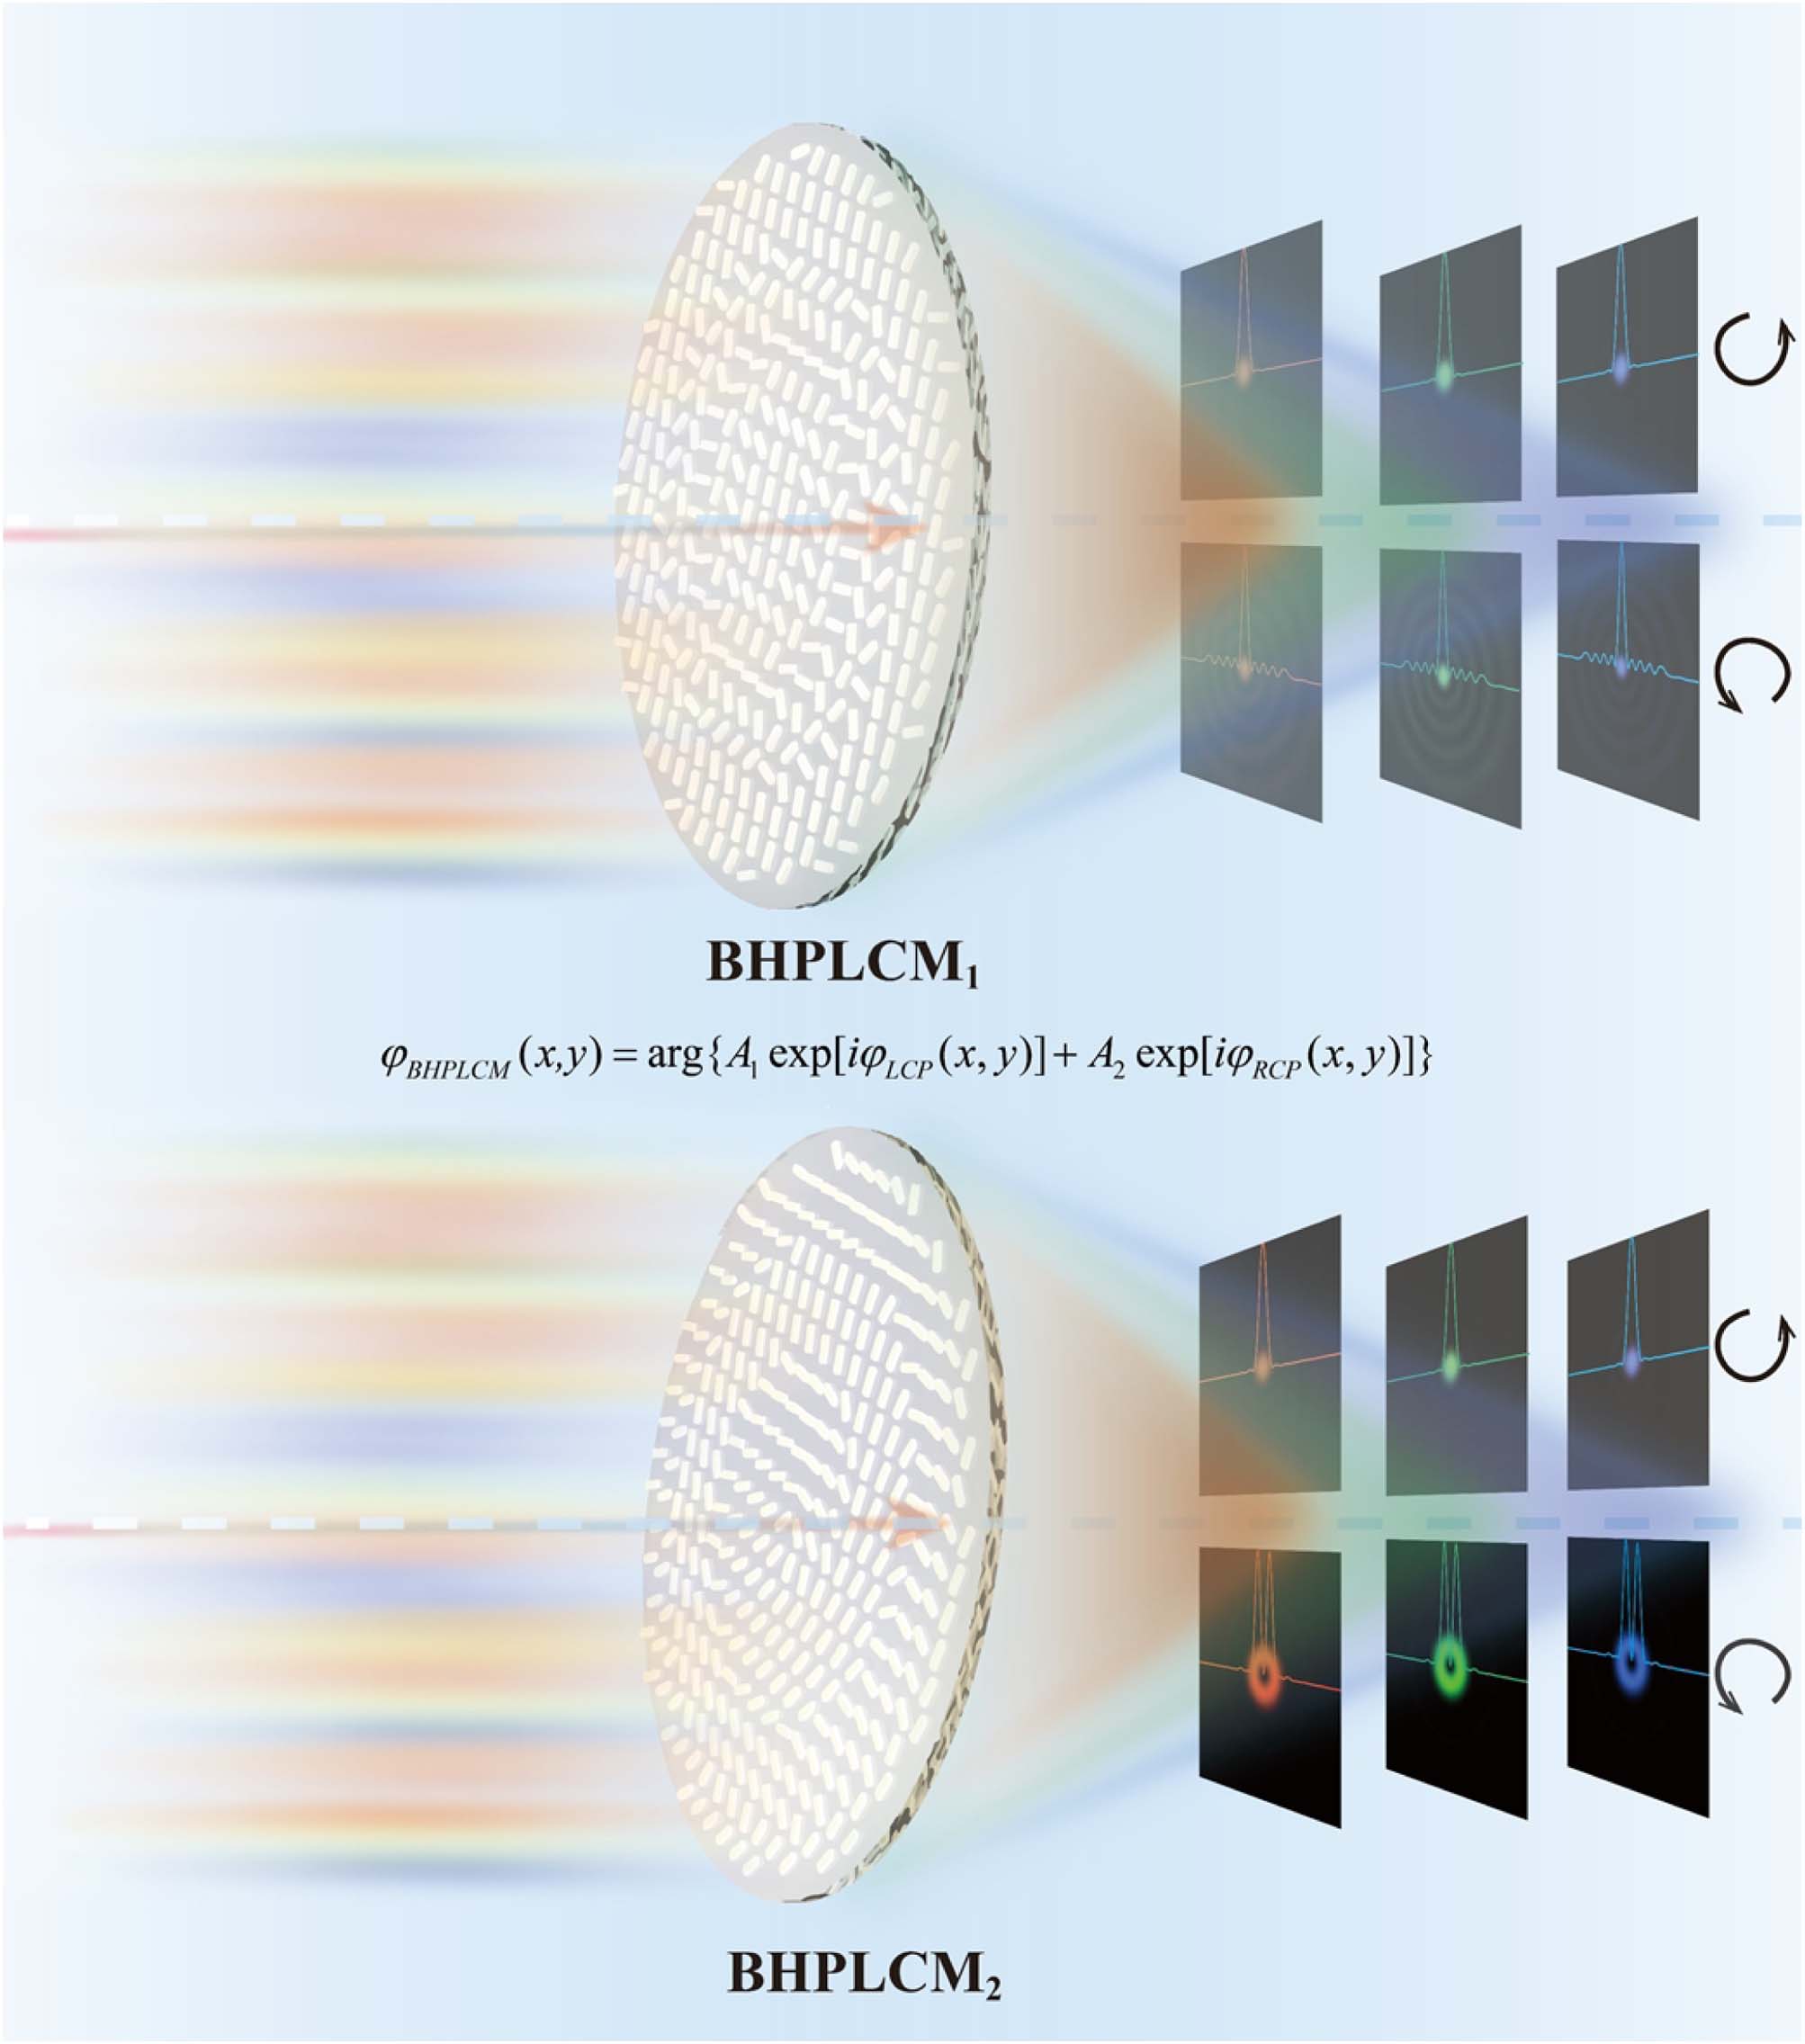 Schematic diagram of broadband high-efficiency polymerized liquid crystal metasurfaces. The first row indicates that the designed BHPLCM1 can enable polarization-switching functions from diffraction-limited focusing to sub-diffraction focusing, and the second row indicates that the designed BHPLCM2 can achieve the polarization-switching behavior from diffraction-limited focusing to focusing vortex beam.